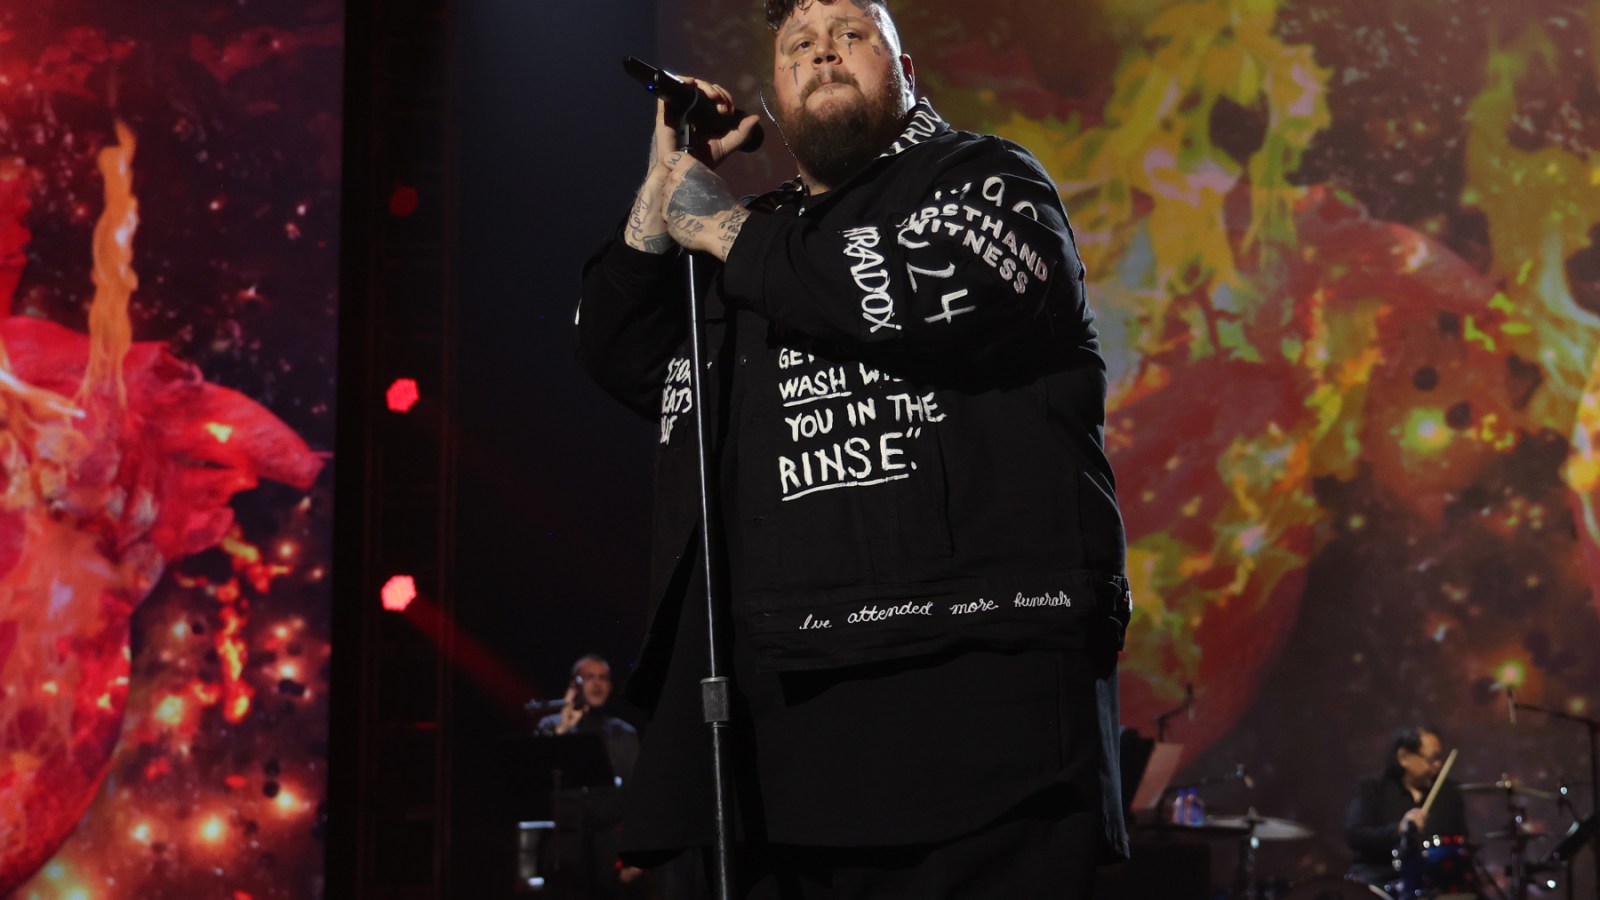 Jellyroll vs. Jelly Roll: Pennsylvania Band Sues Country Star for Trademark Infringement